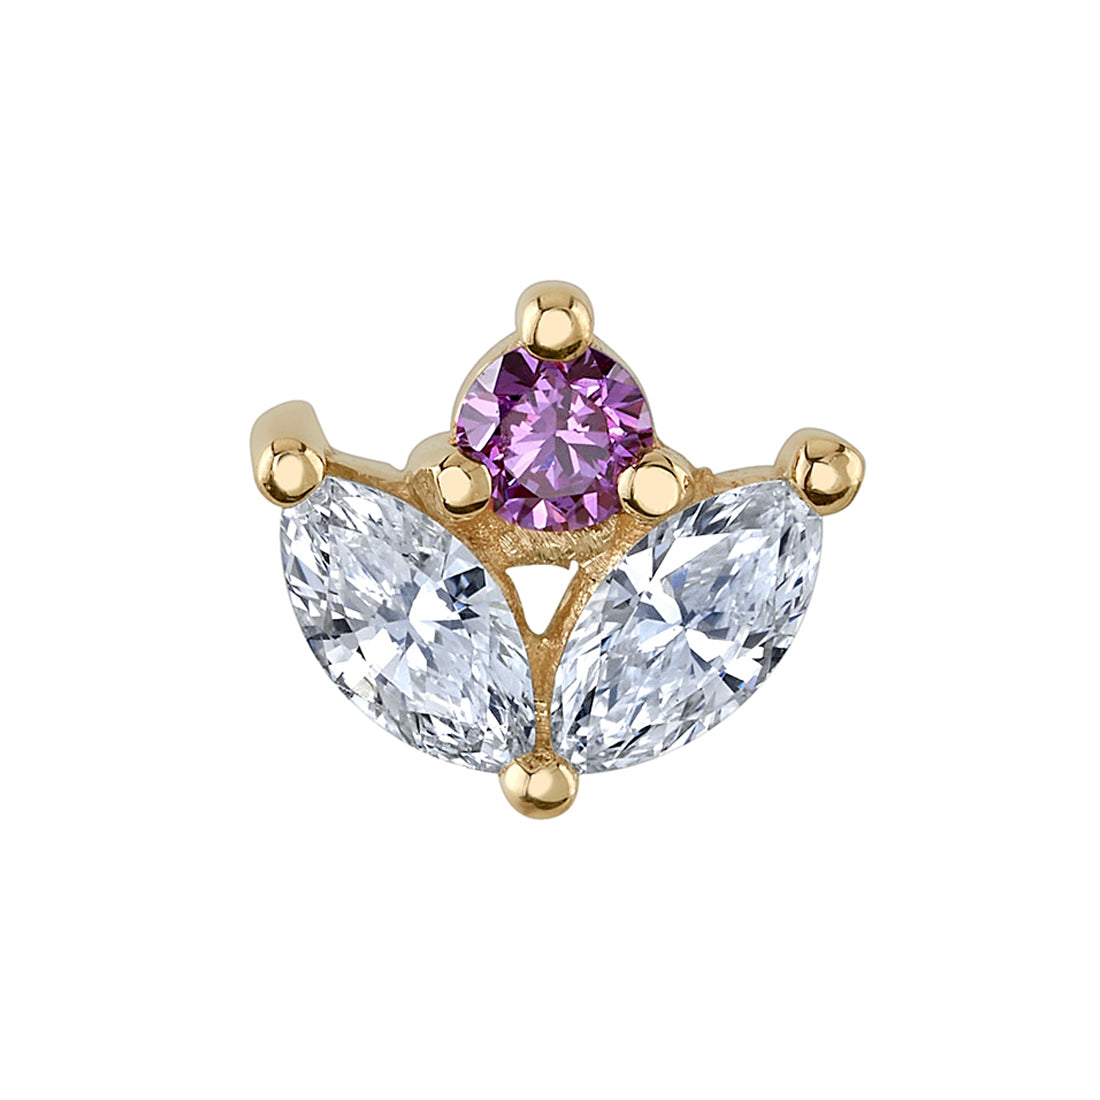 "Bloom" Threaded End in Gold with Diamond & Rhodolite